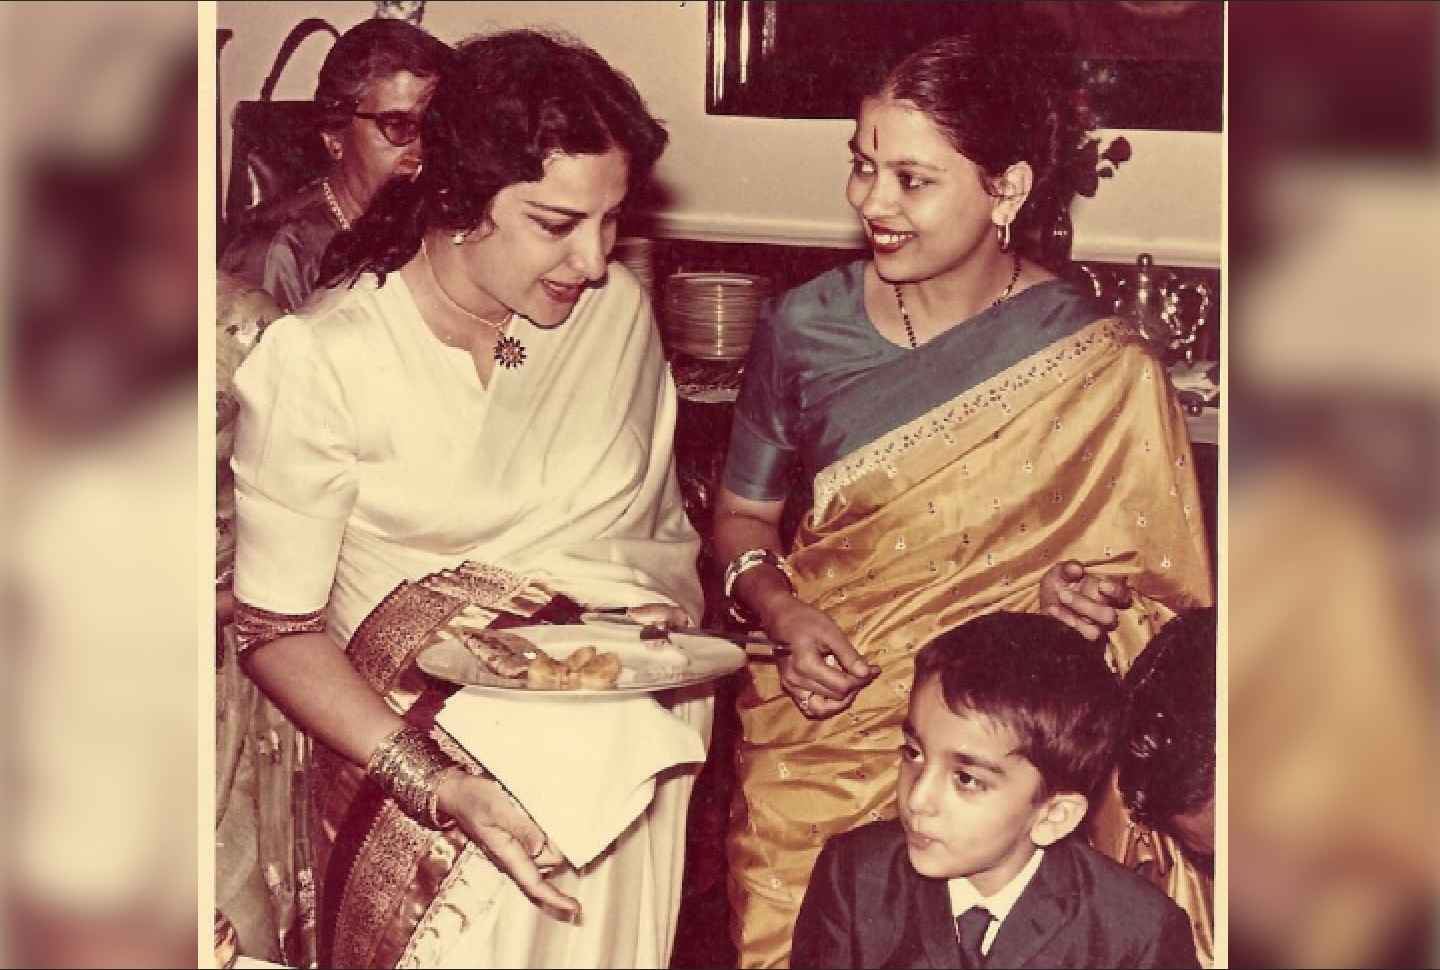 This Rare Childhood Photo Of Sanjay Dutt With His Mother, Nargis Dutt Will Make You Smile